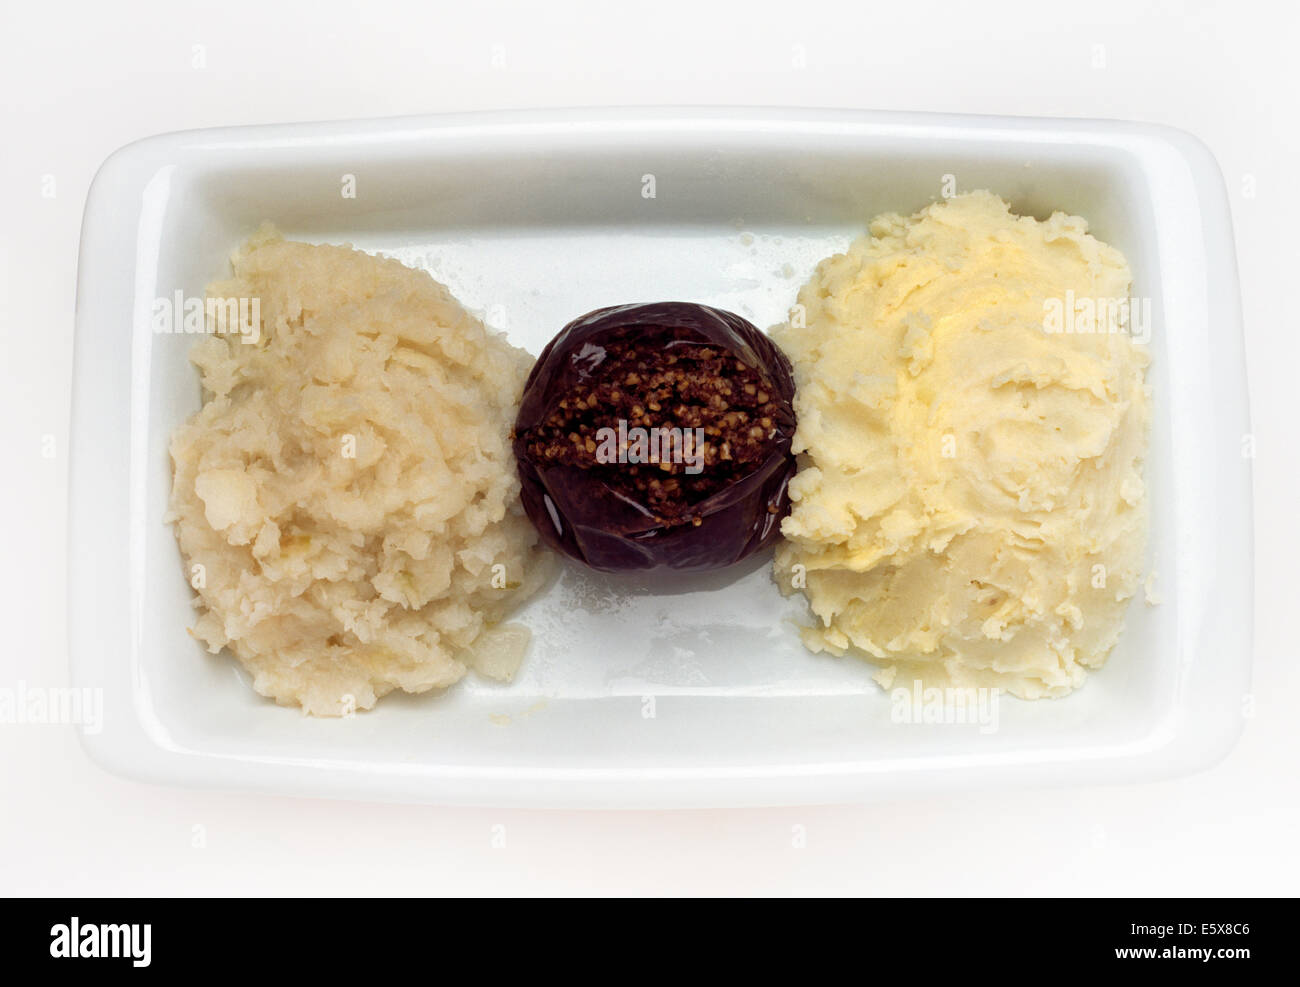 Haggis Traditionally Served With Neeps (scottish For Turnips) & Potatoes Stock Photo